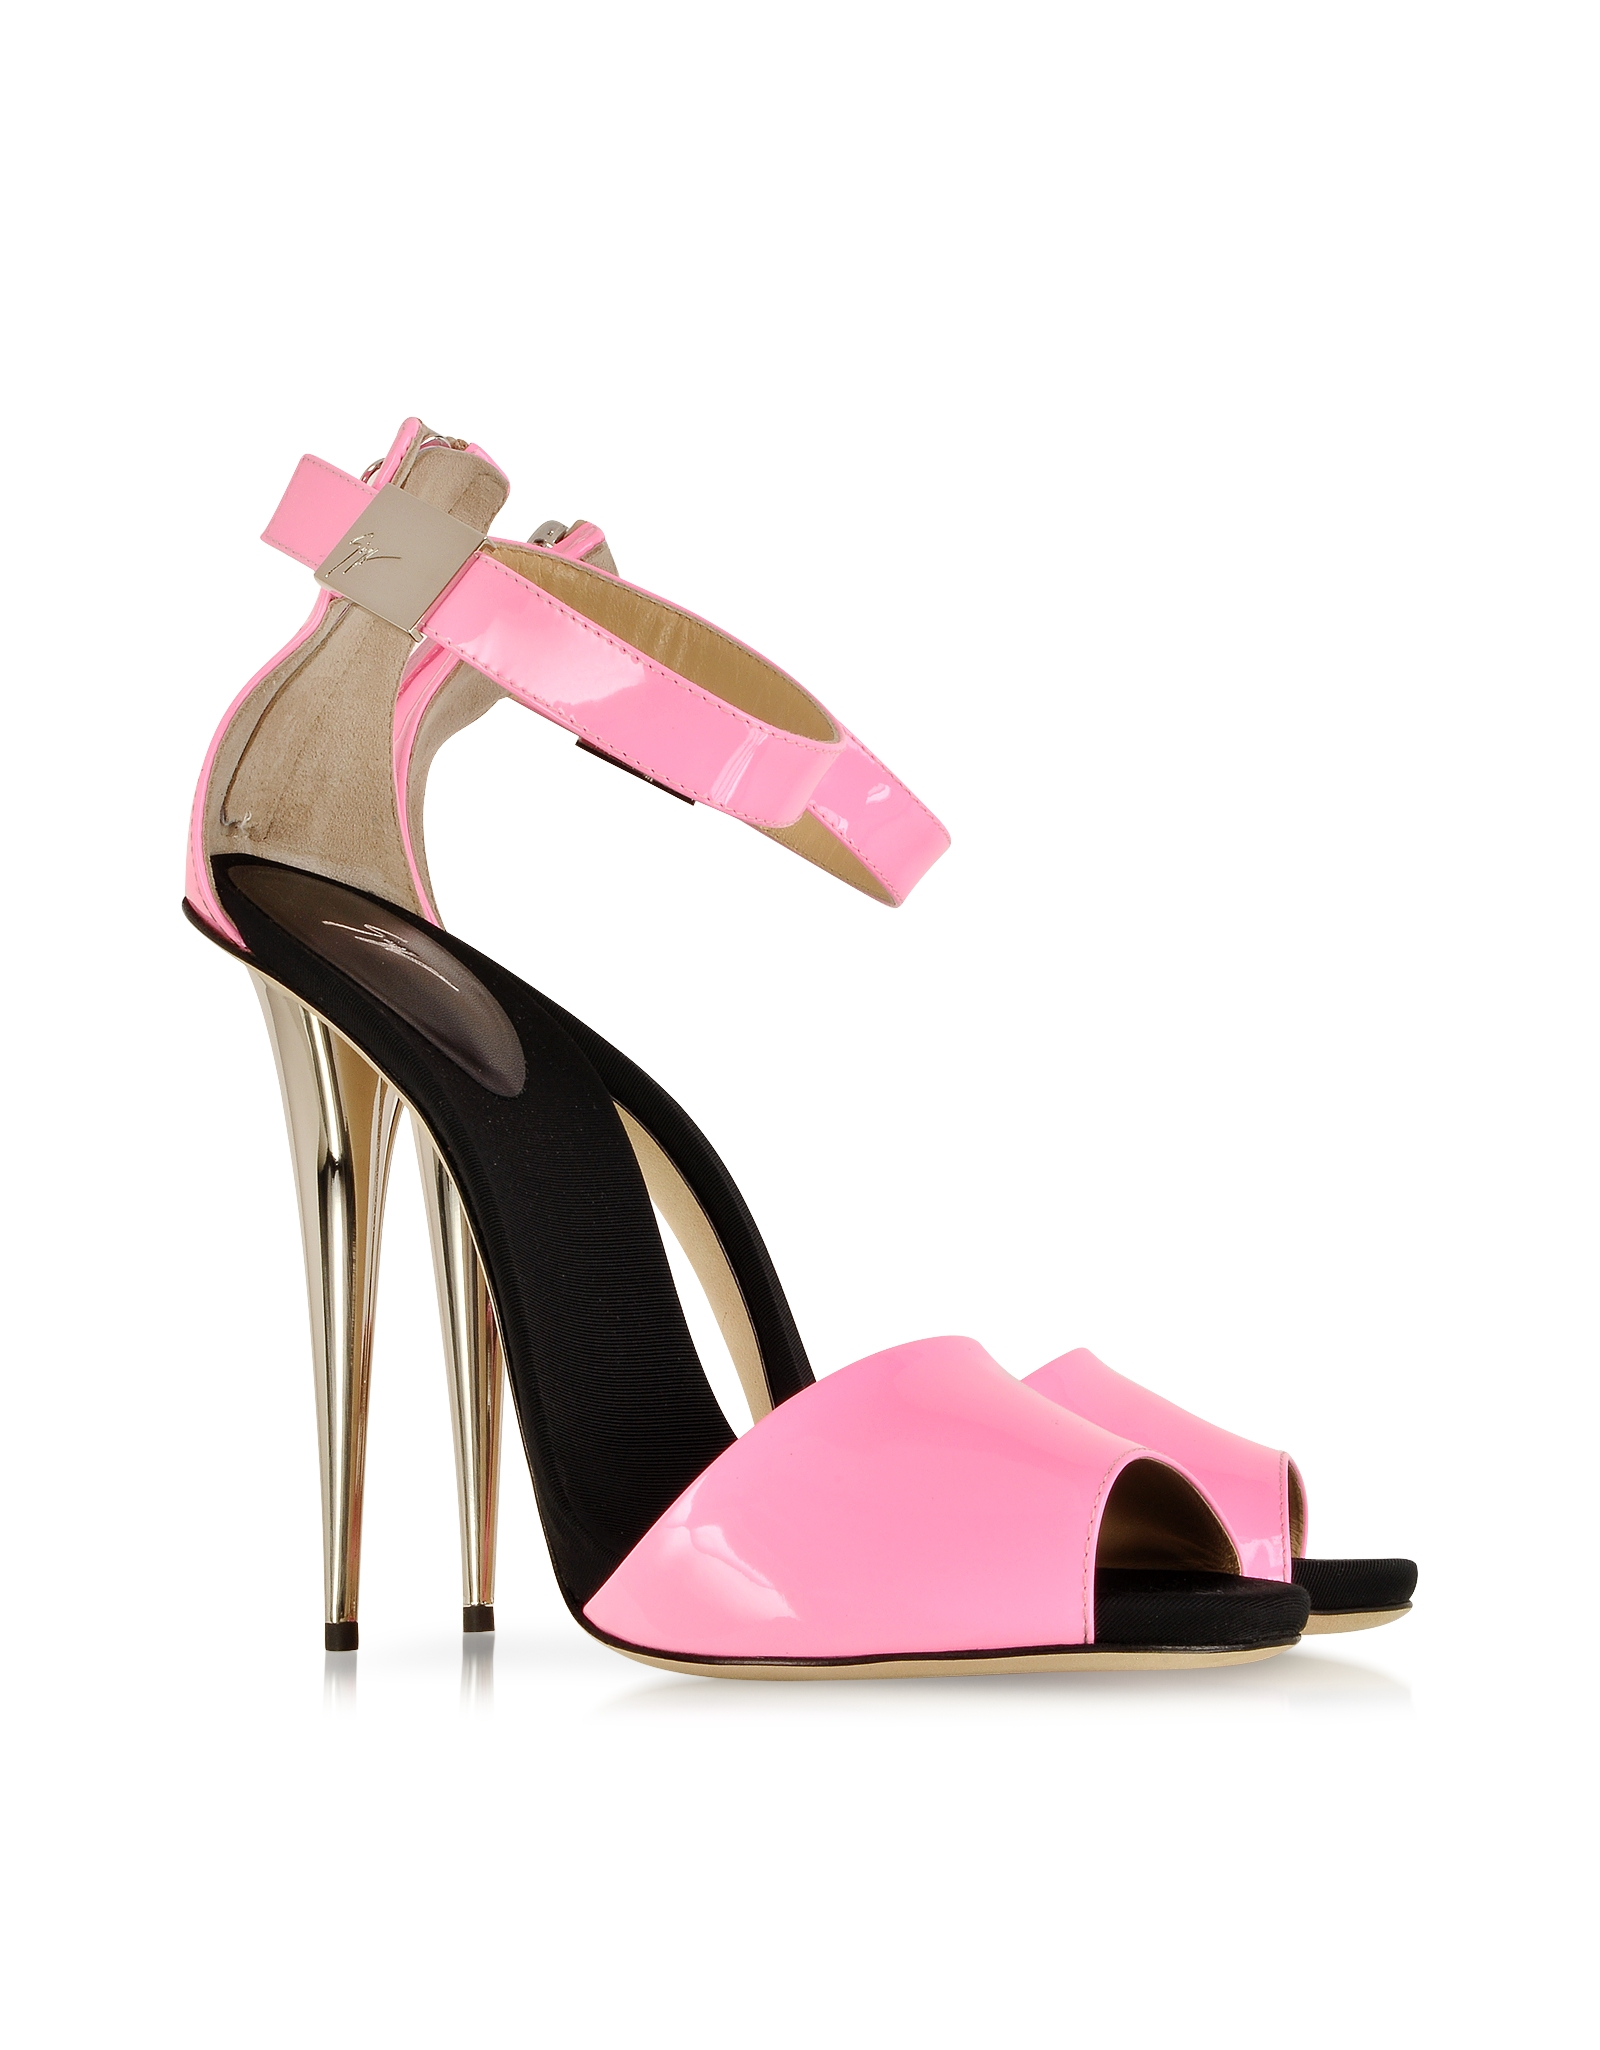 Lyst - Giuseppe Zanotti Neon Pink Patent Leather Sandal in Pink